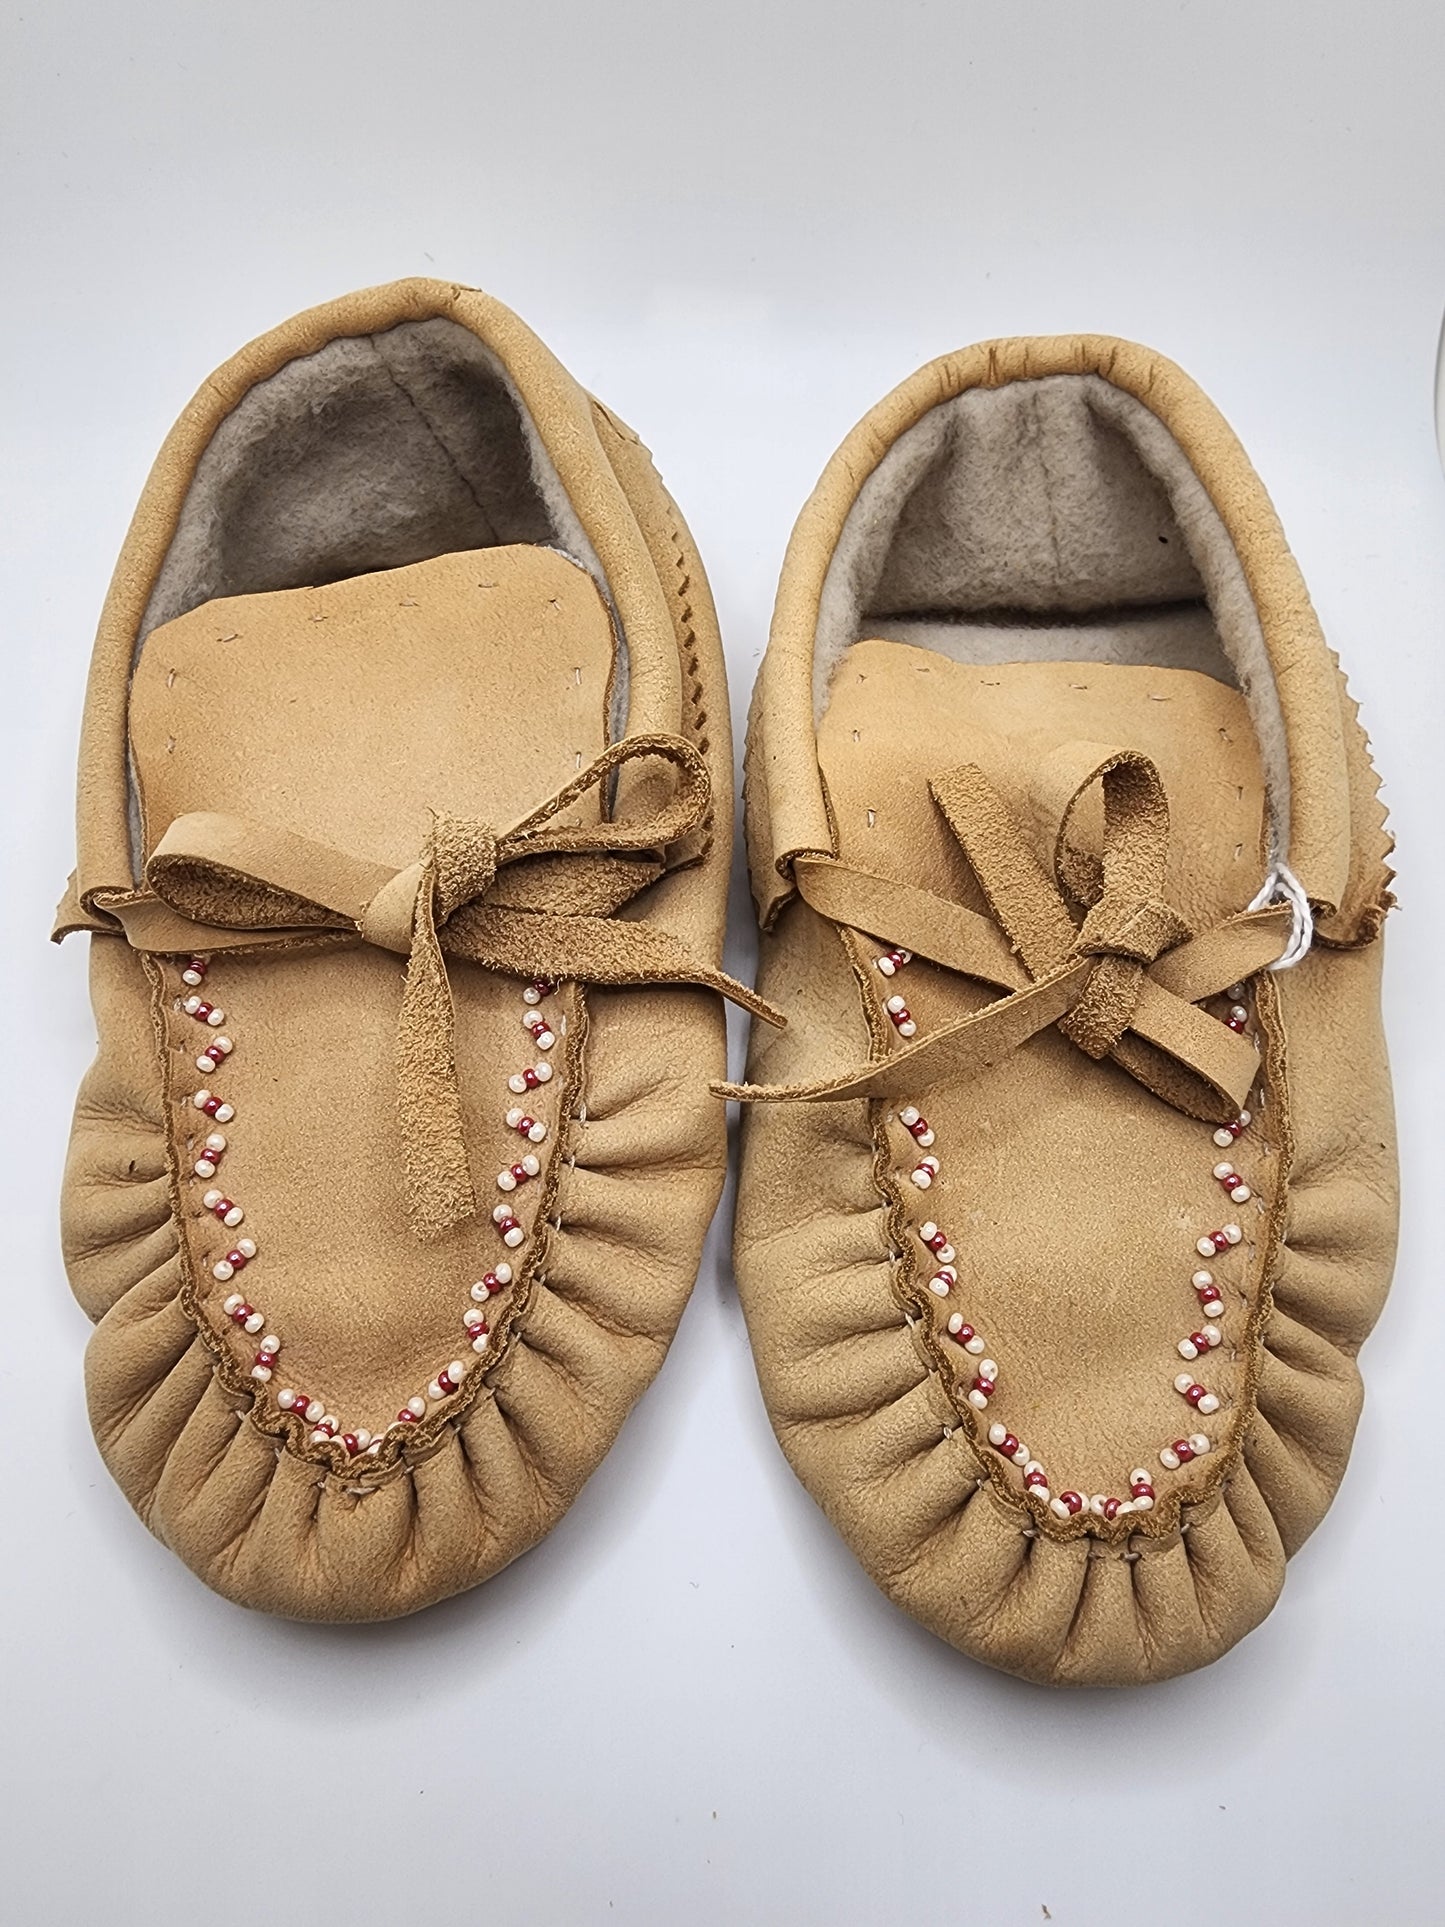 Leather Moccasins - Size 12(U.S) - with Beaded Tongue Design